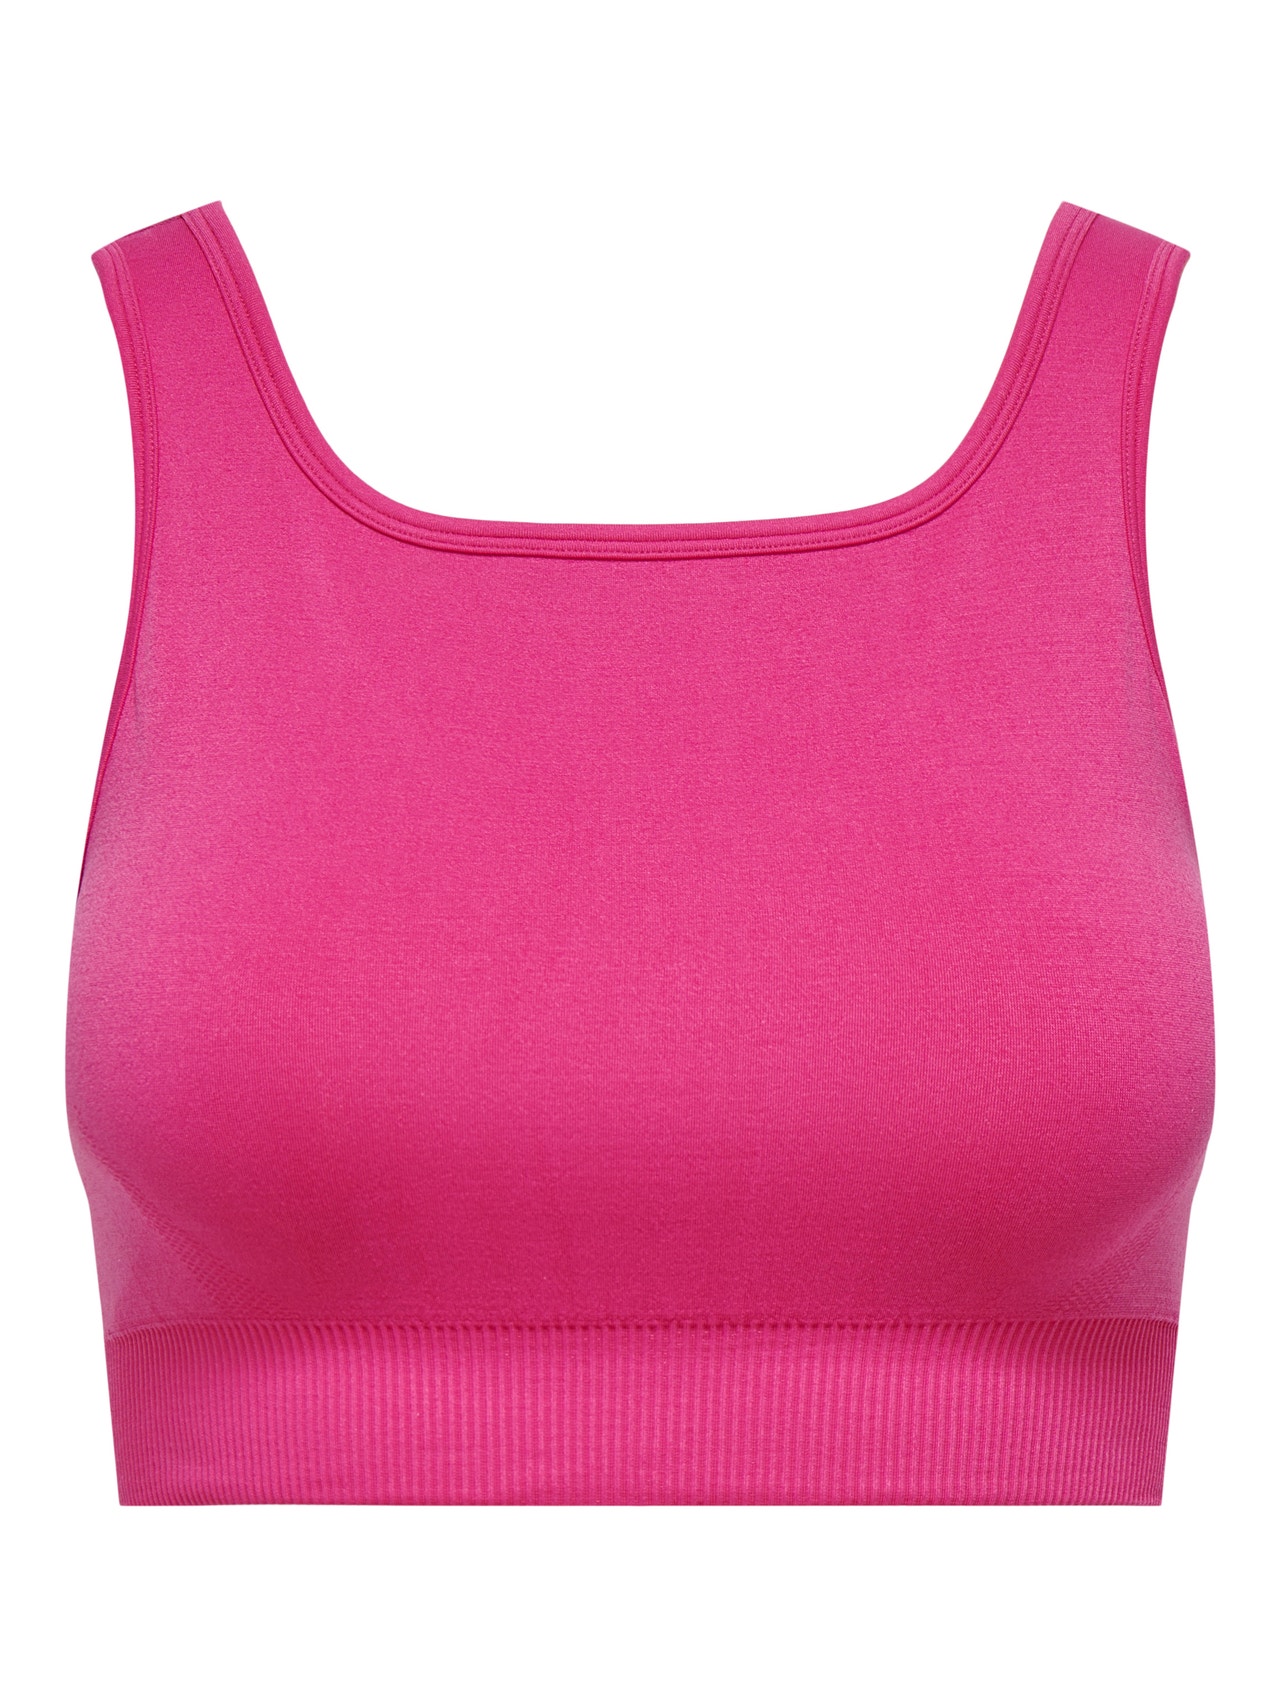 ONLY Schmale Träger BH -Pink Yarrow - 15281096